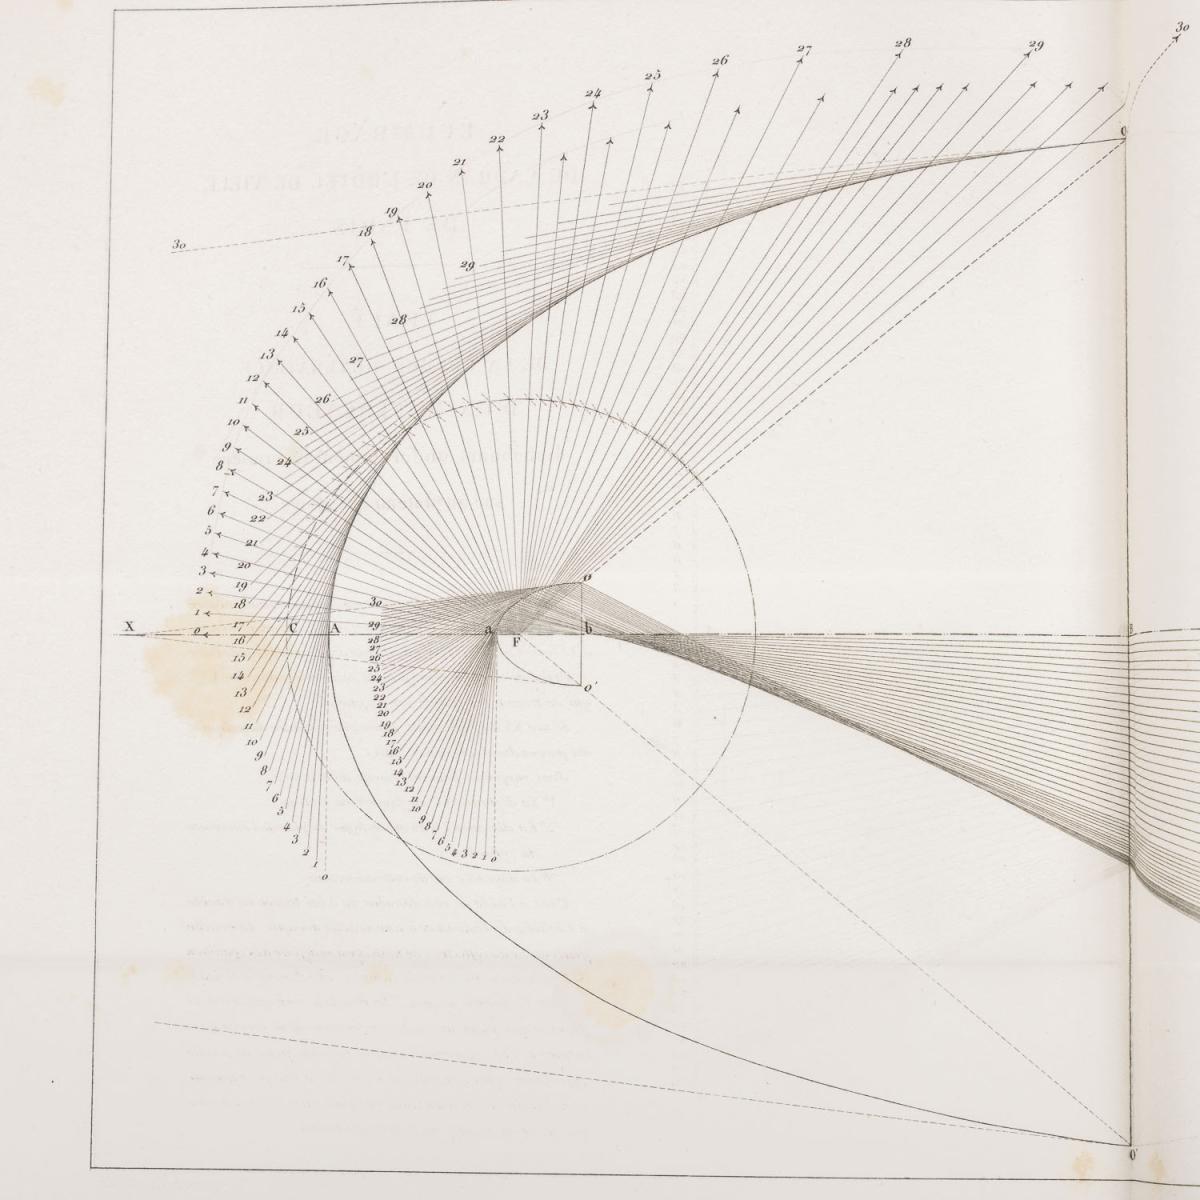 The complete works of Augustin-Jean Fresnel